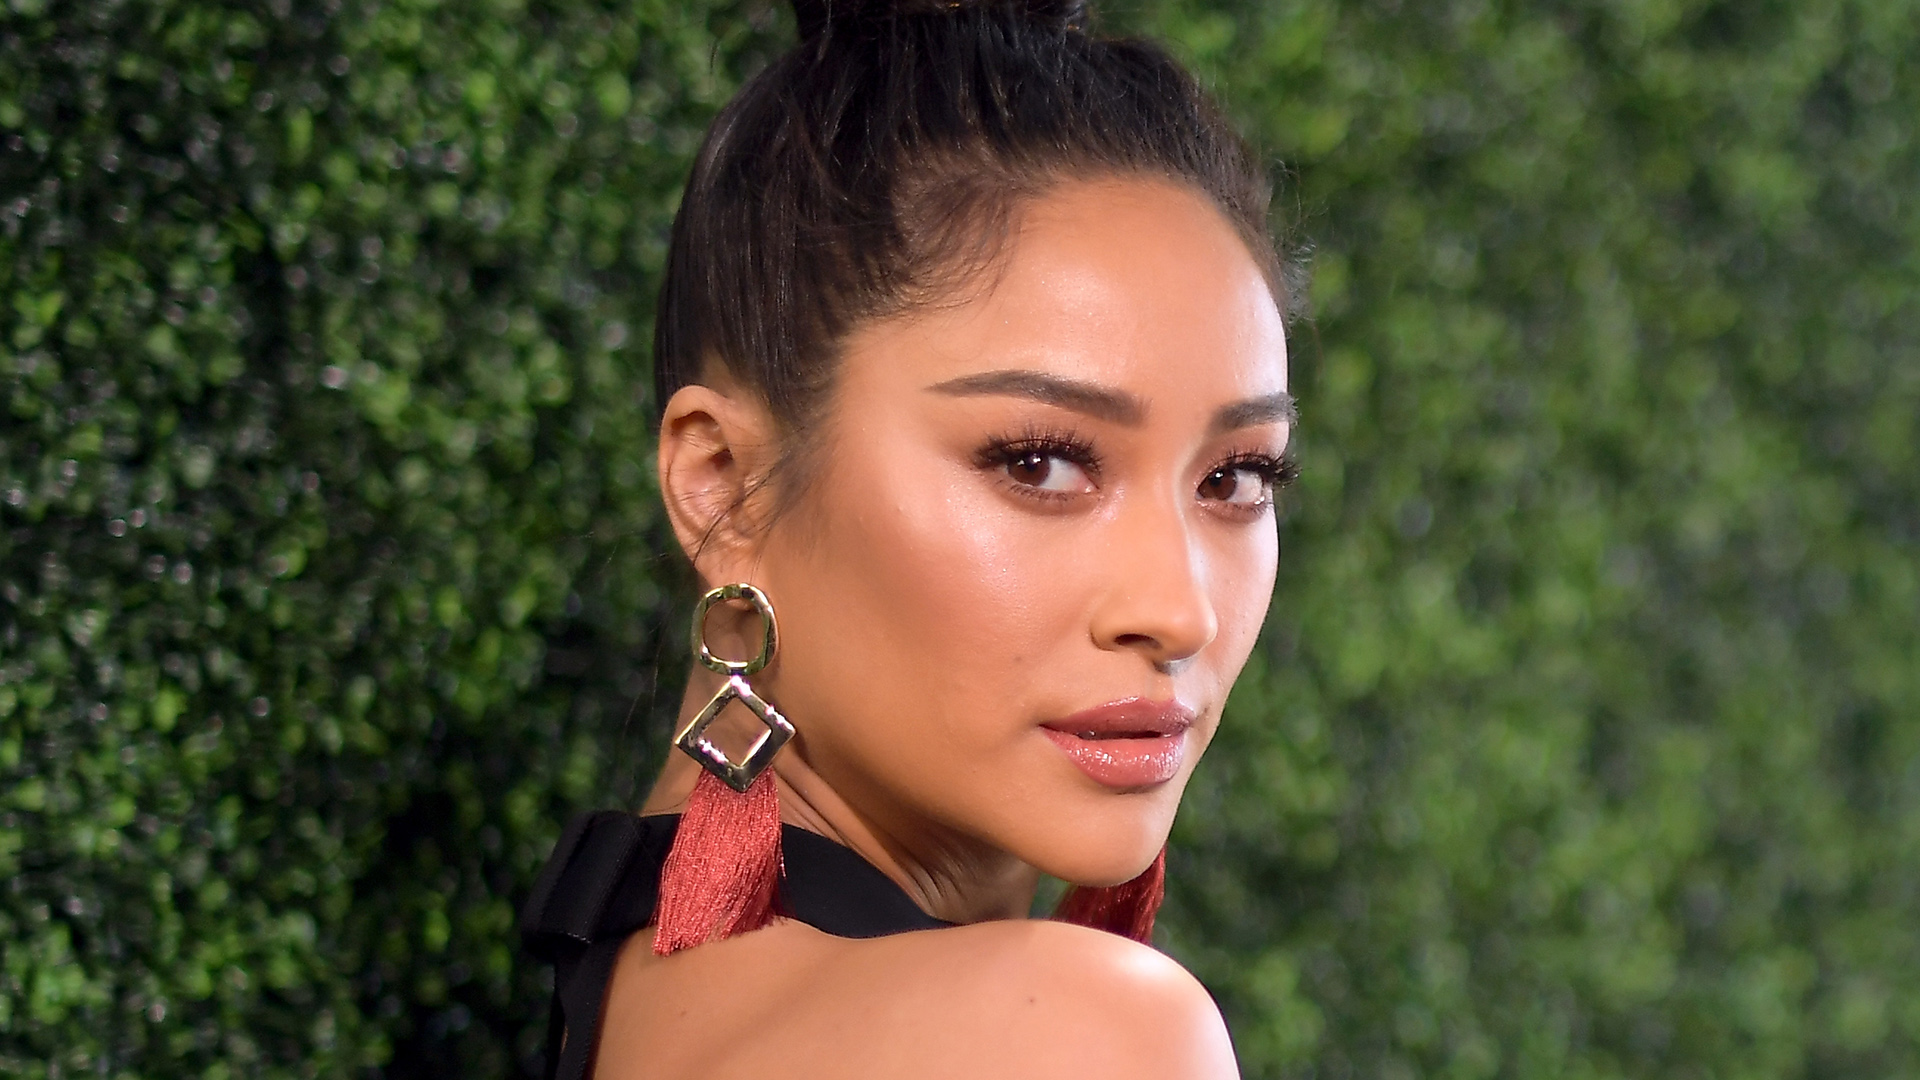 Cute Shay Mitchell 2018 Wallpapers